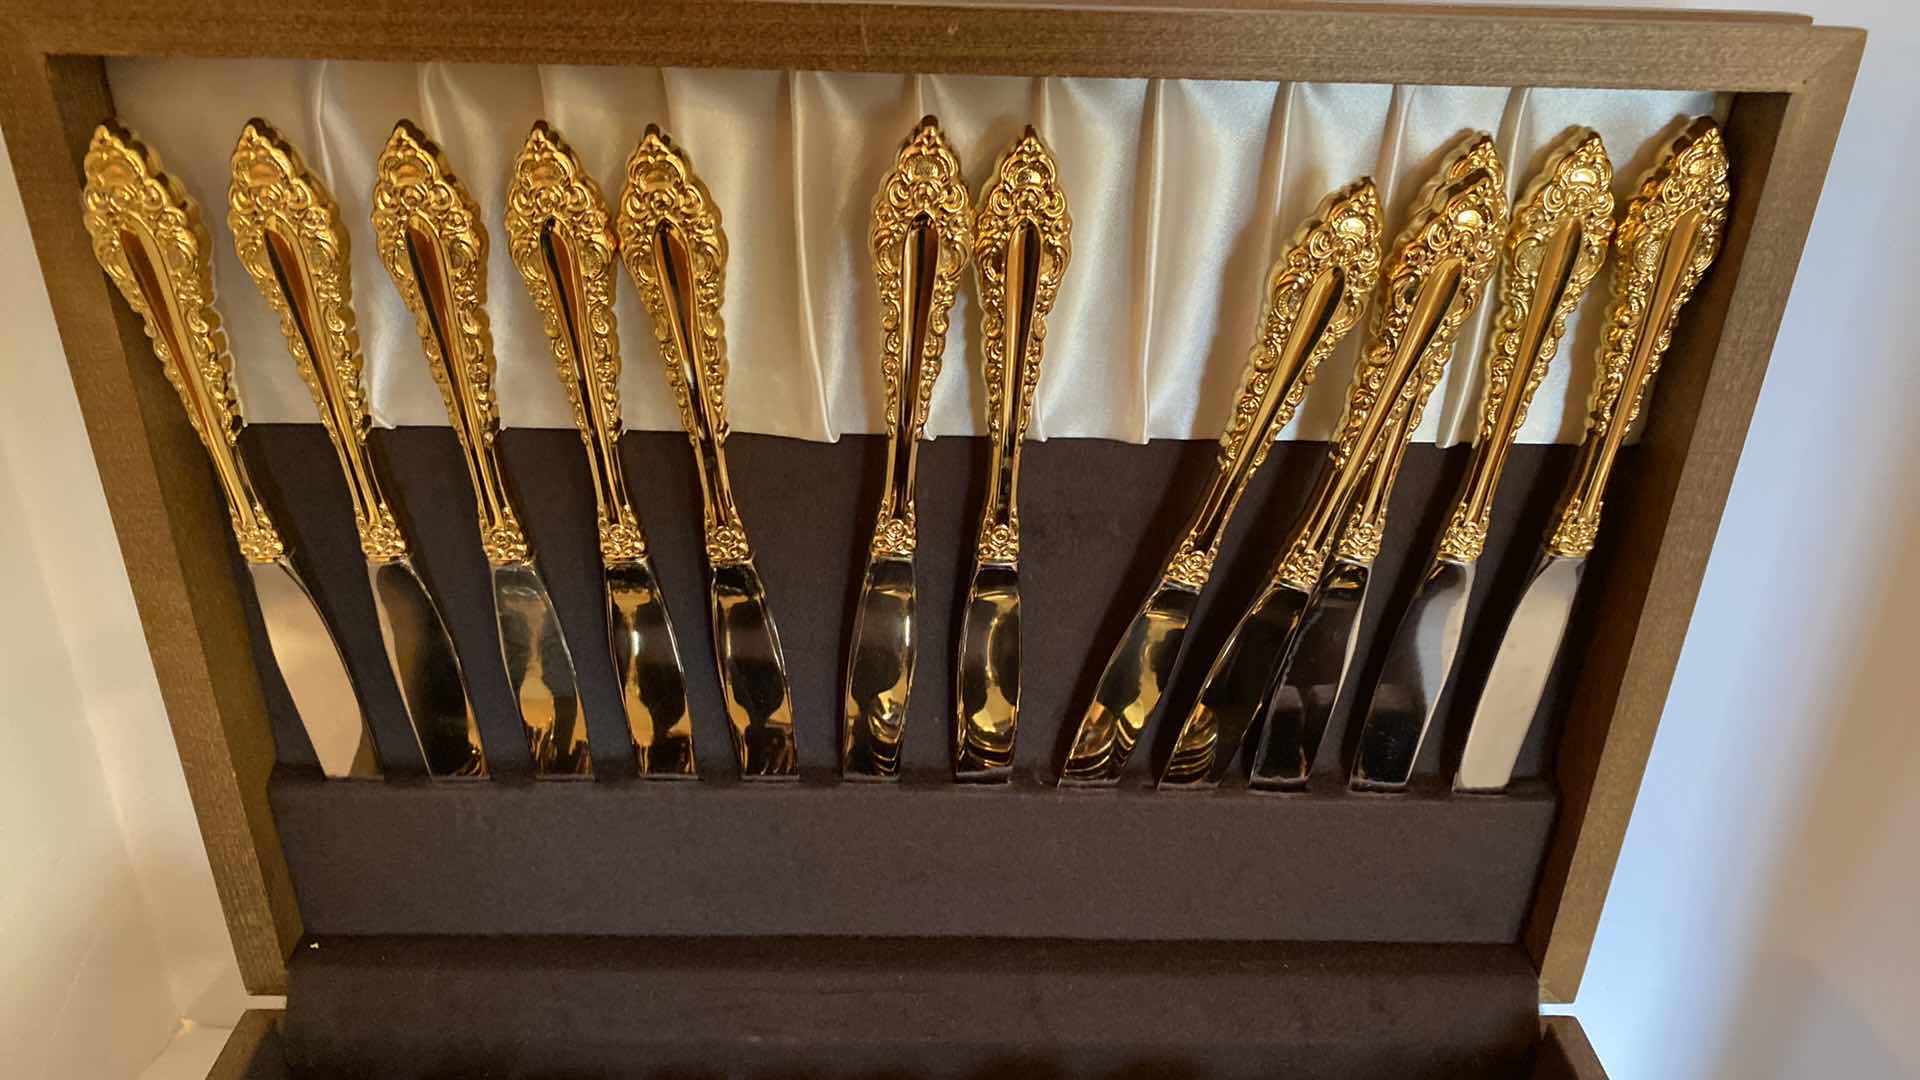 Photo 2 of COMMUNITY GOLD ELECTROPLATE SERVICE FOR 12 PATTERN GOLDEN ROYAL GRANDEAUB WITH SERVING PIECES